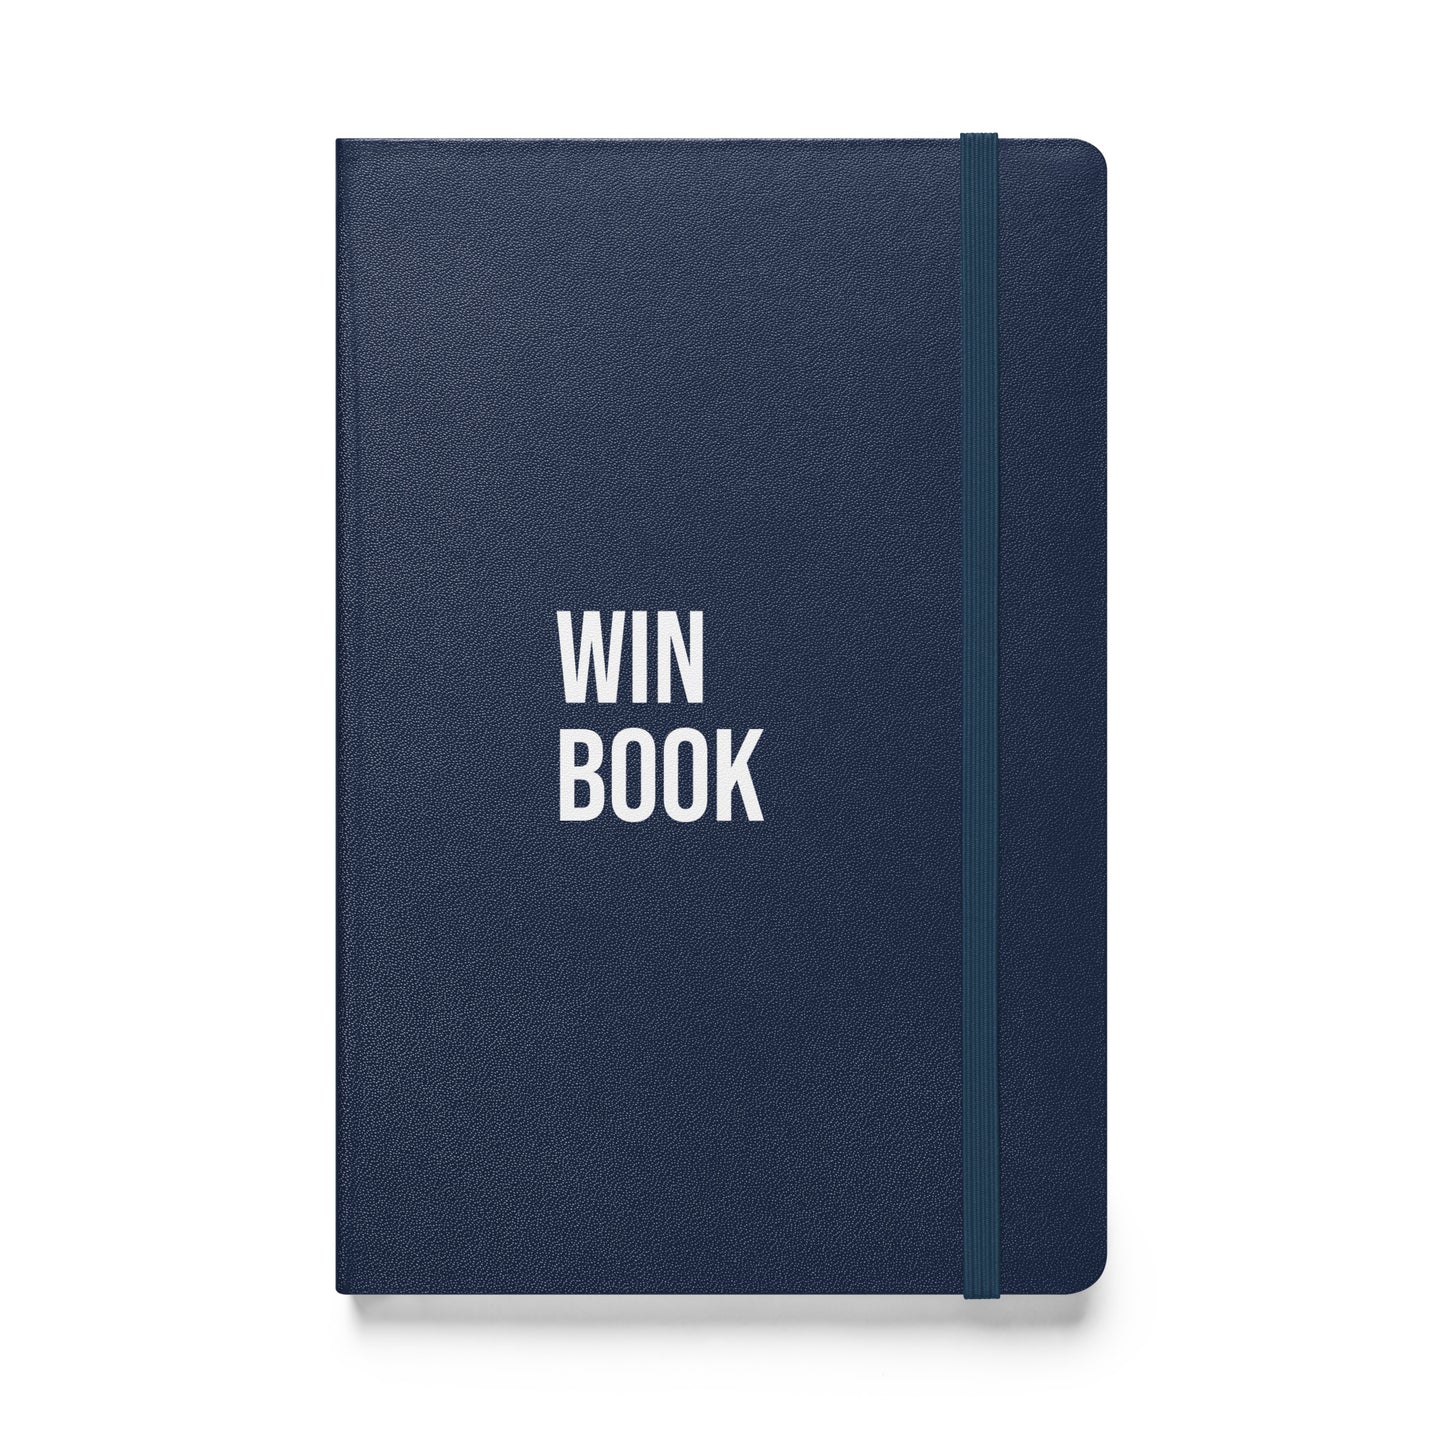 Win Book | Hardcover Bound Notebook